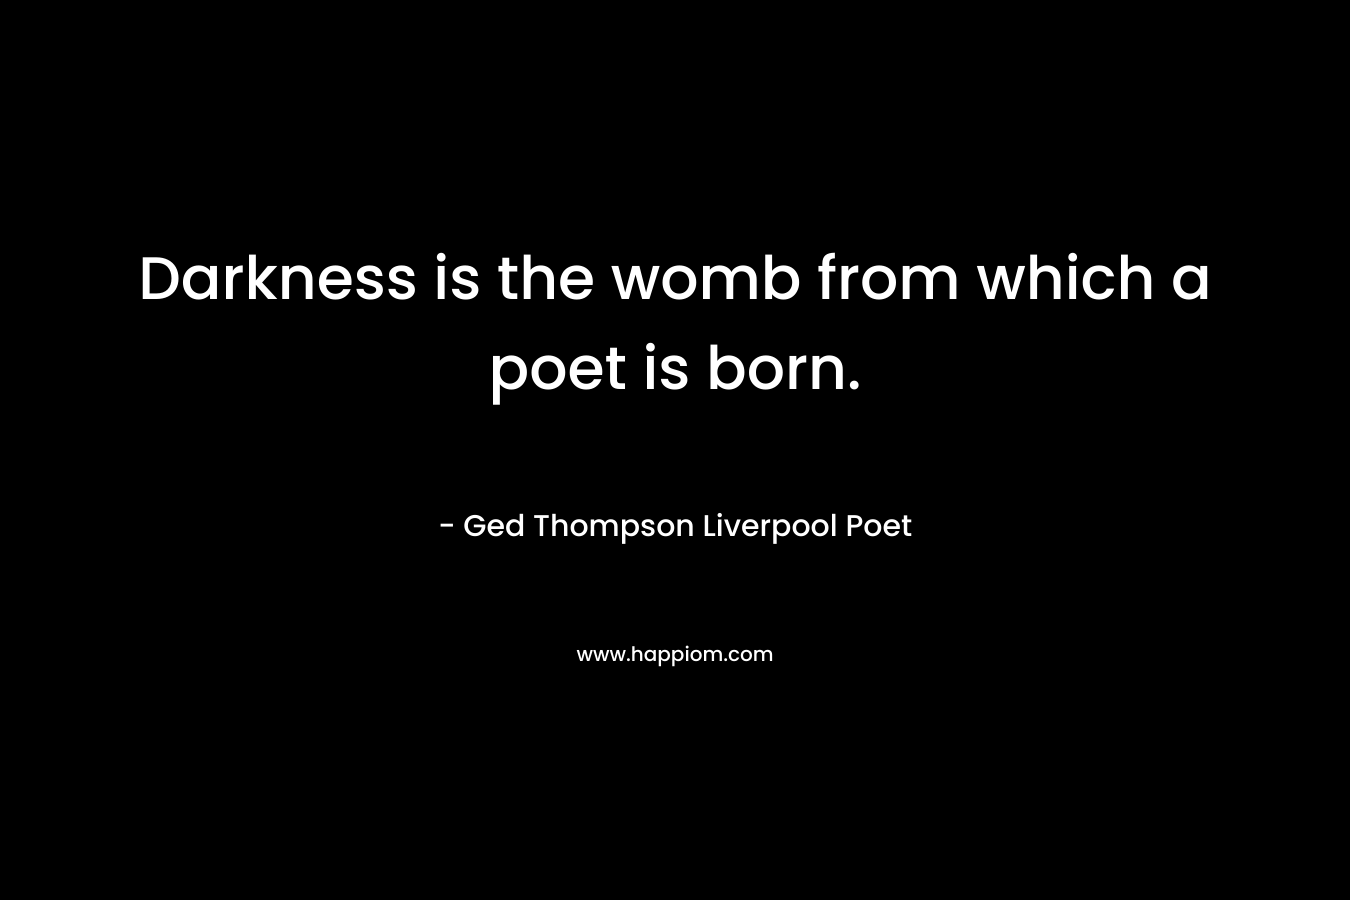 Darkness is the womb from which a poet is born.